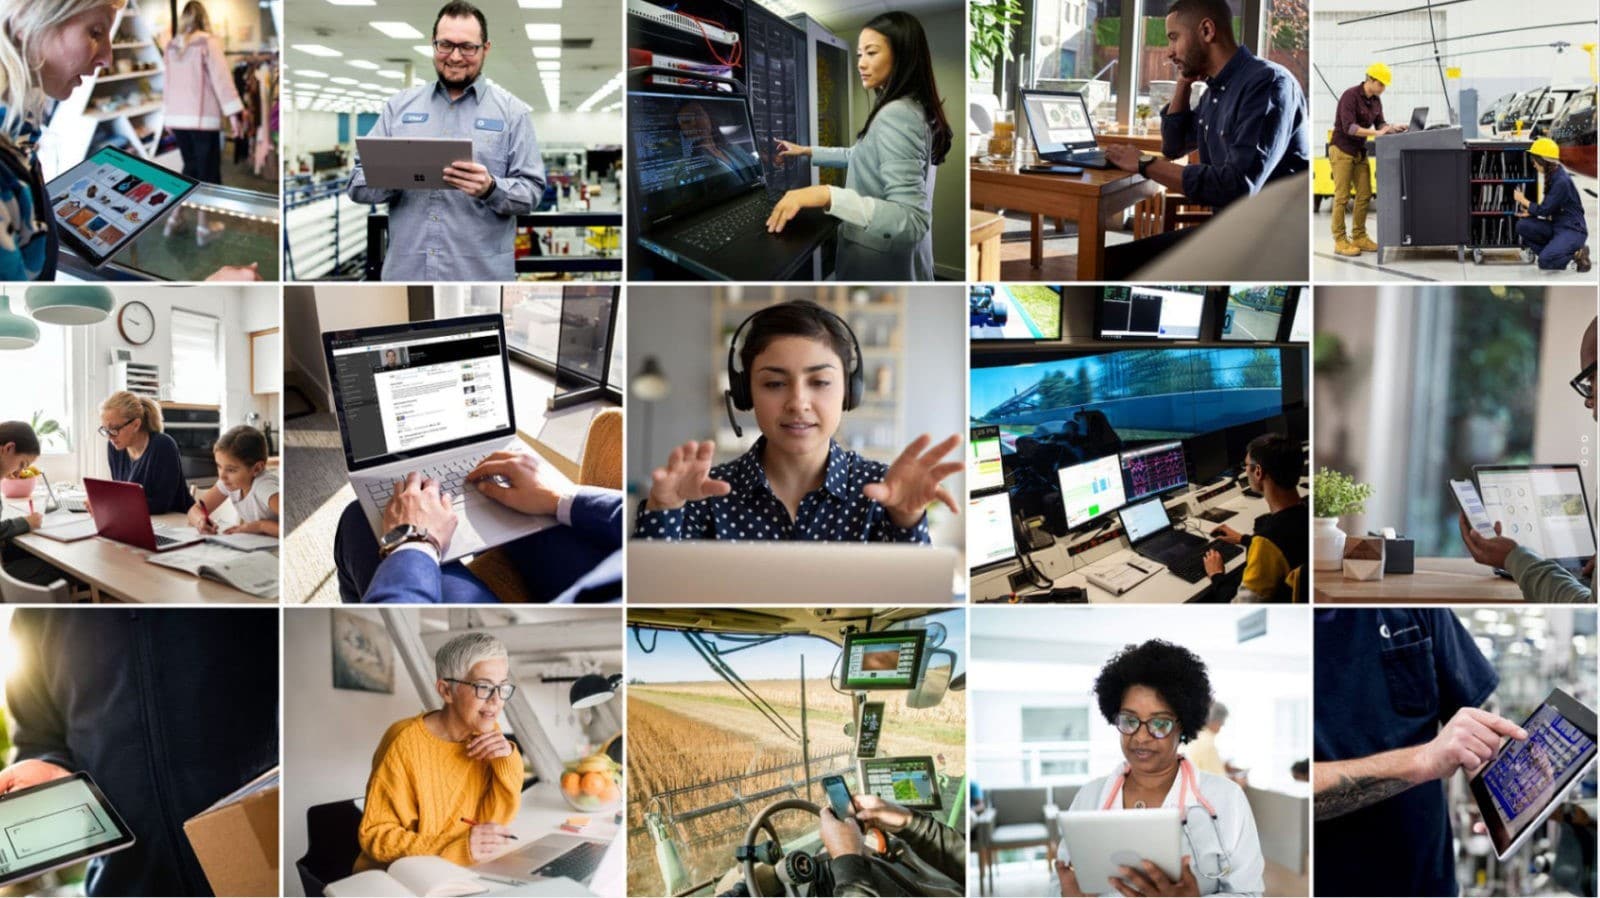 Collage of images of professionals using different types of digital devices